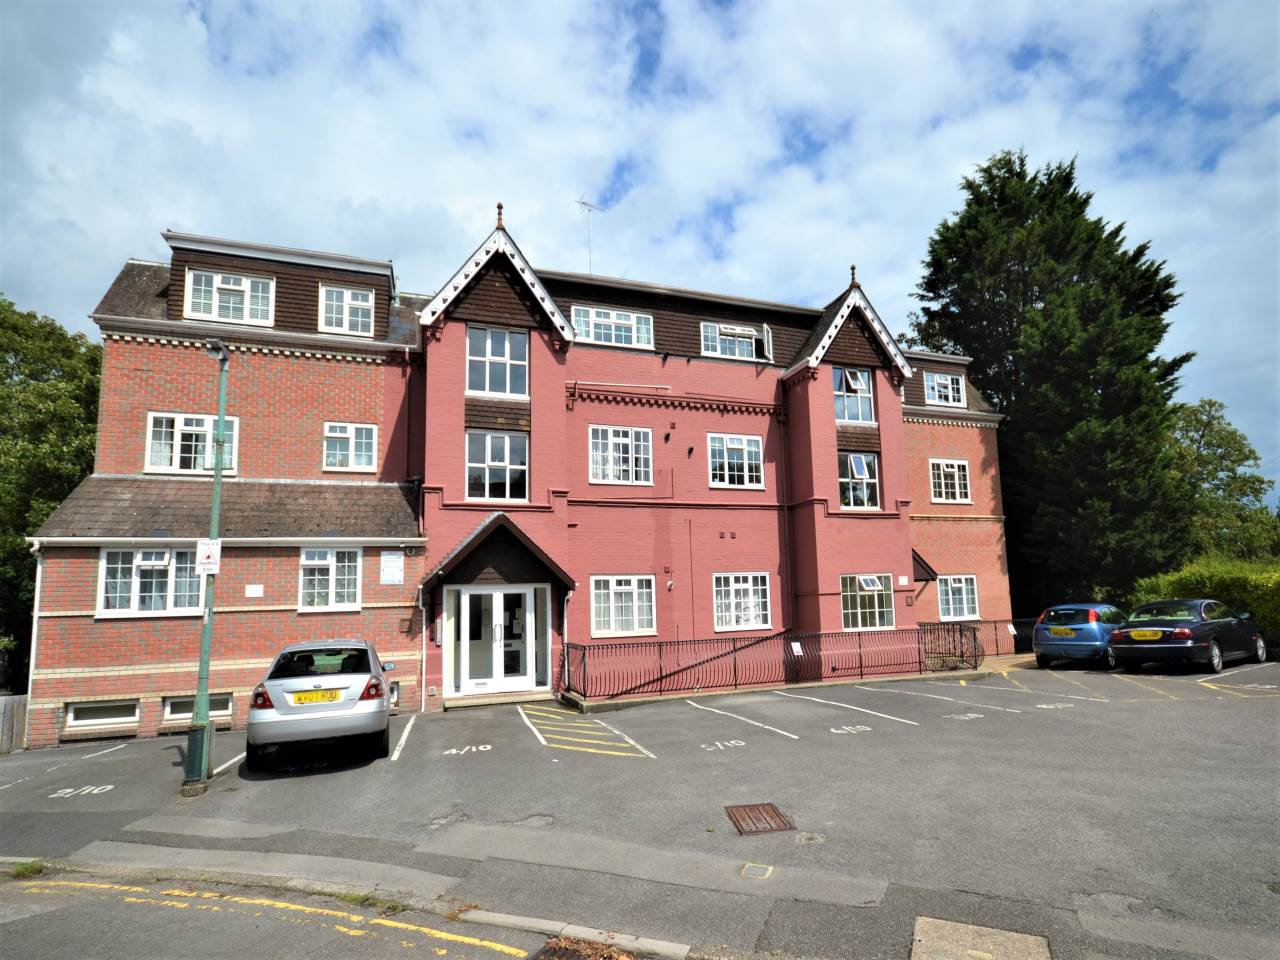 NO CHAIN!! SUPERB LOCATION* ONE BEDROOM*  RAISED GROUND FLOOR FLAT OVERLOOKING BOURNEMOUTH GARDENS AND TENNIS COURTS* SHARE OF FREEHOLD* PARKING* GAS HEATING* IDEAL BUY TO LET!! 